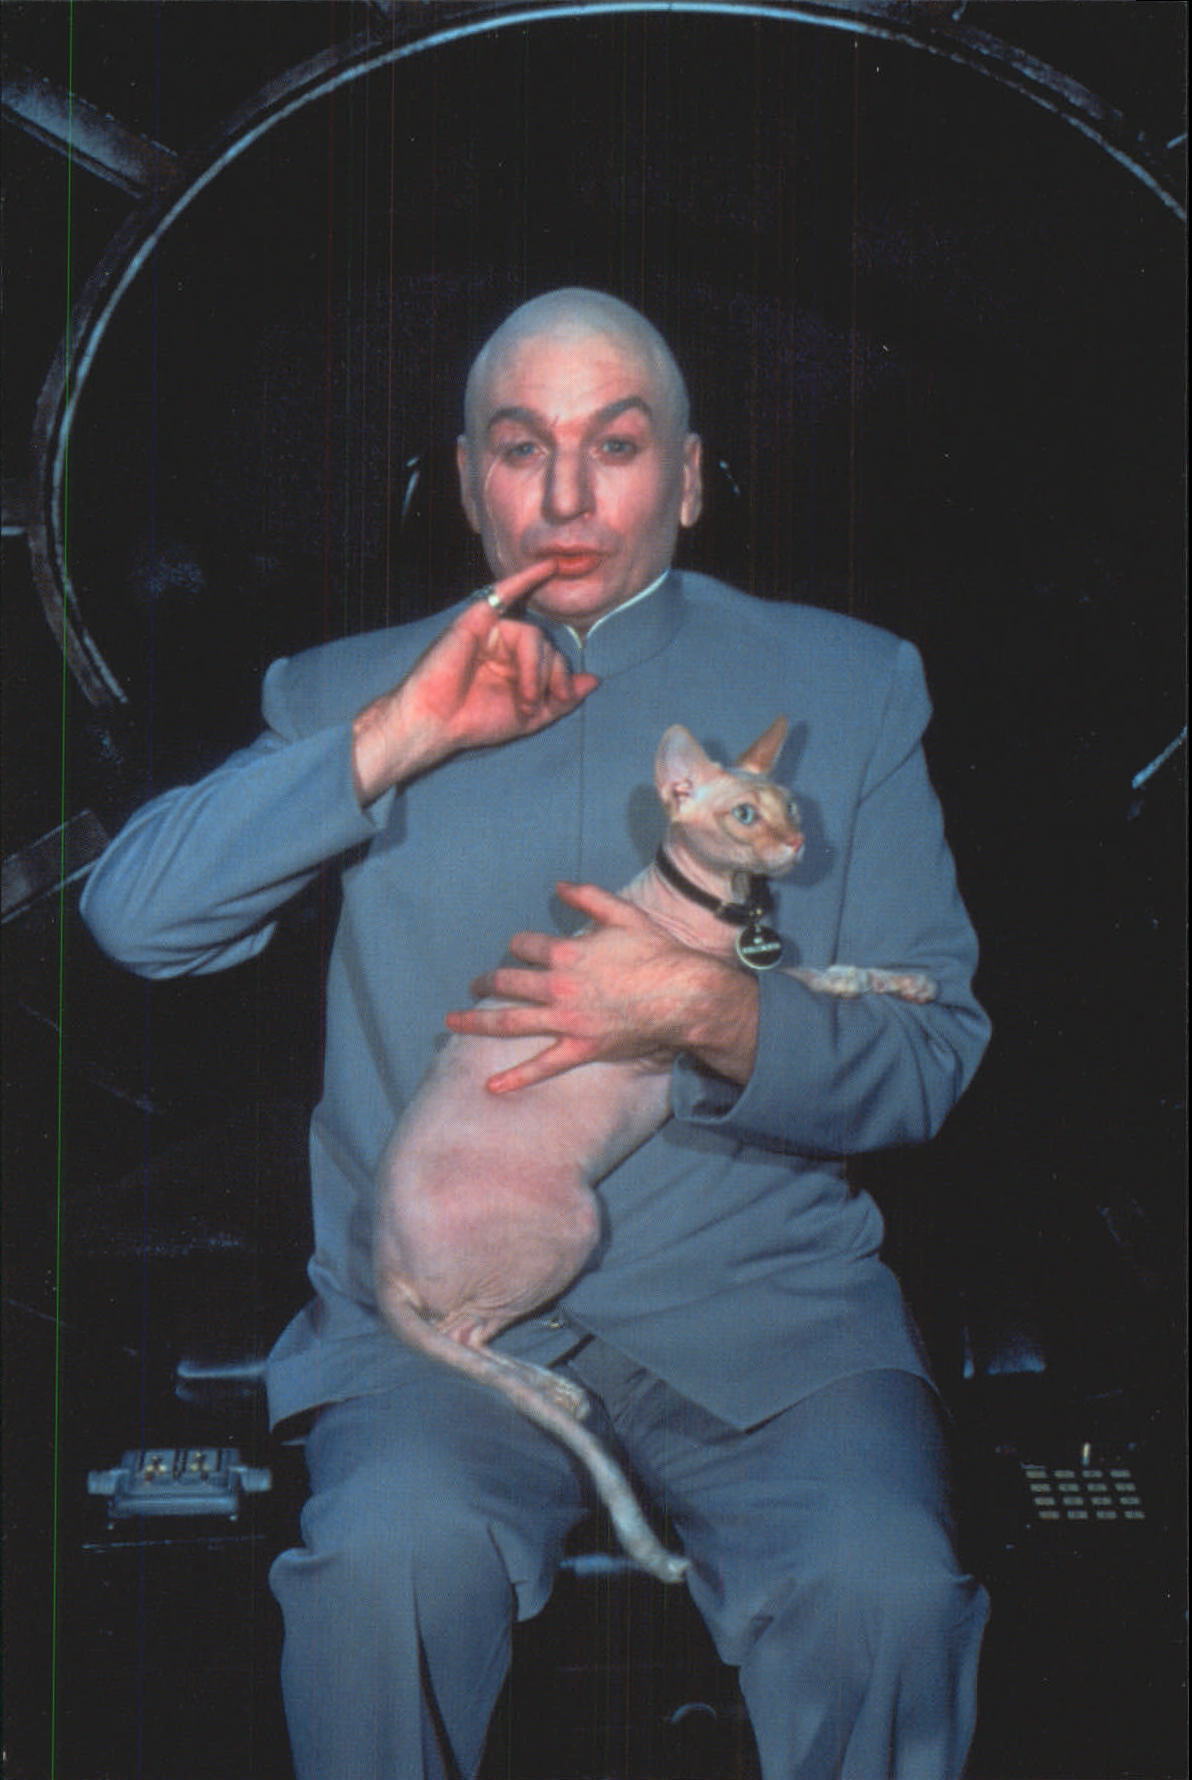 1999 Austin Powers Photocards #16 Dr. Evil and cat | eBay